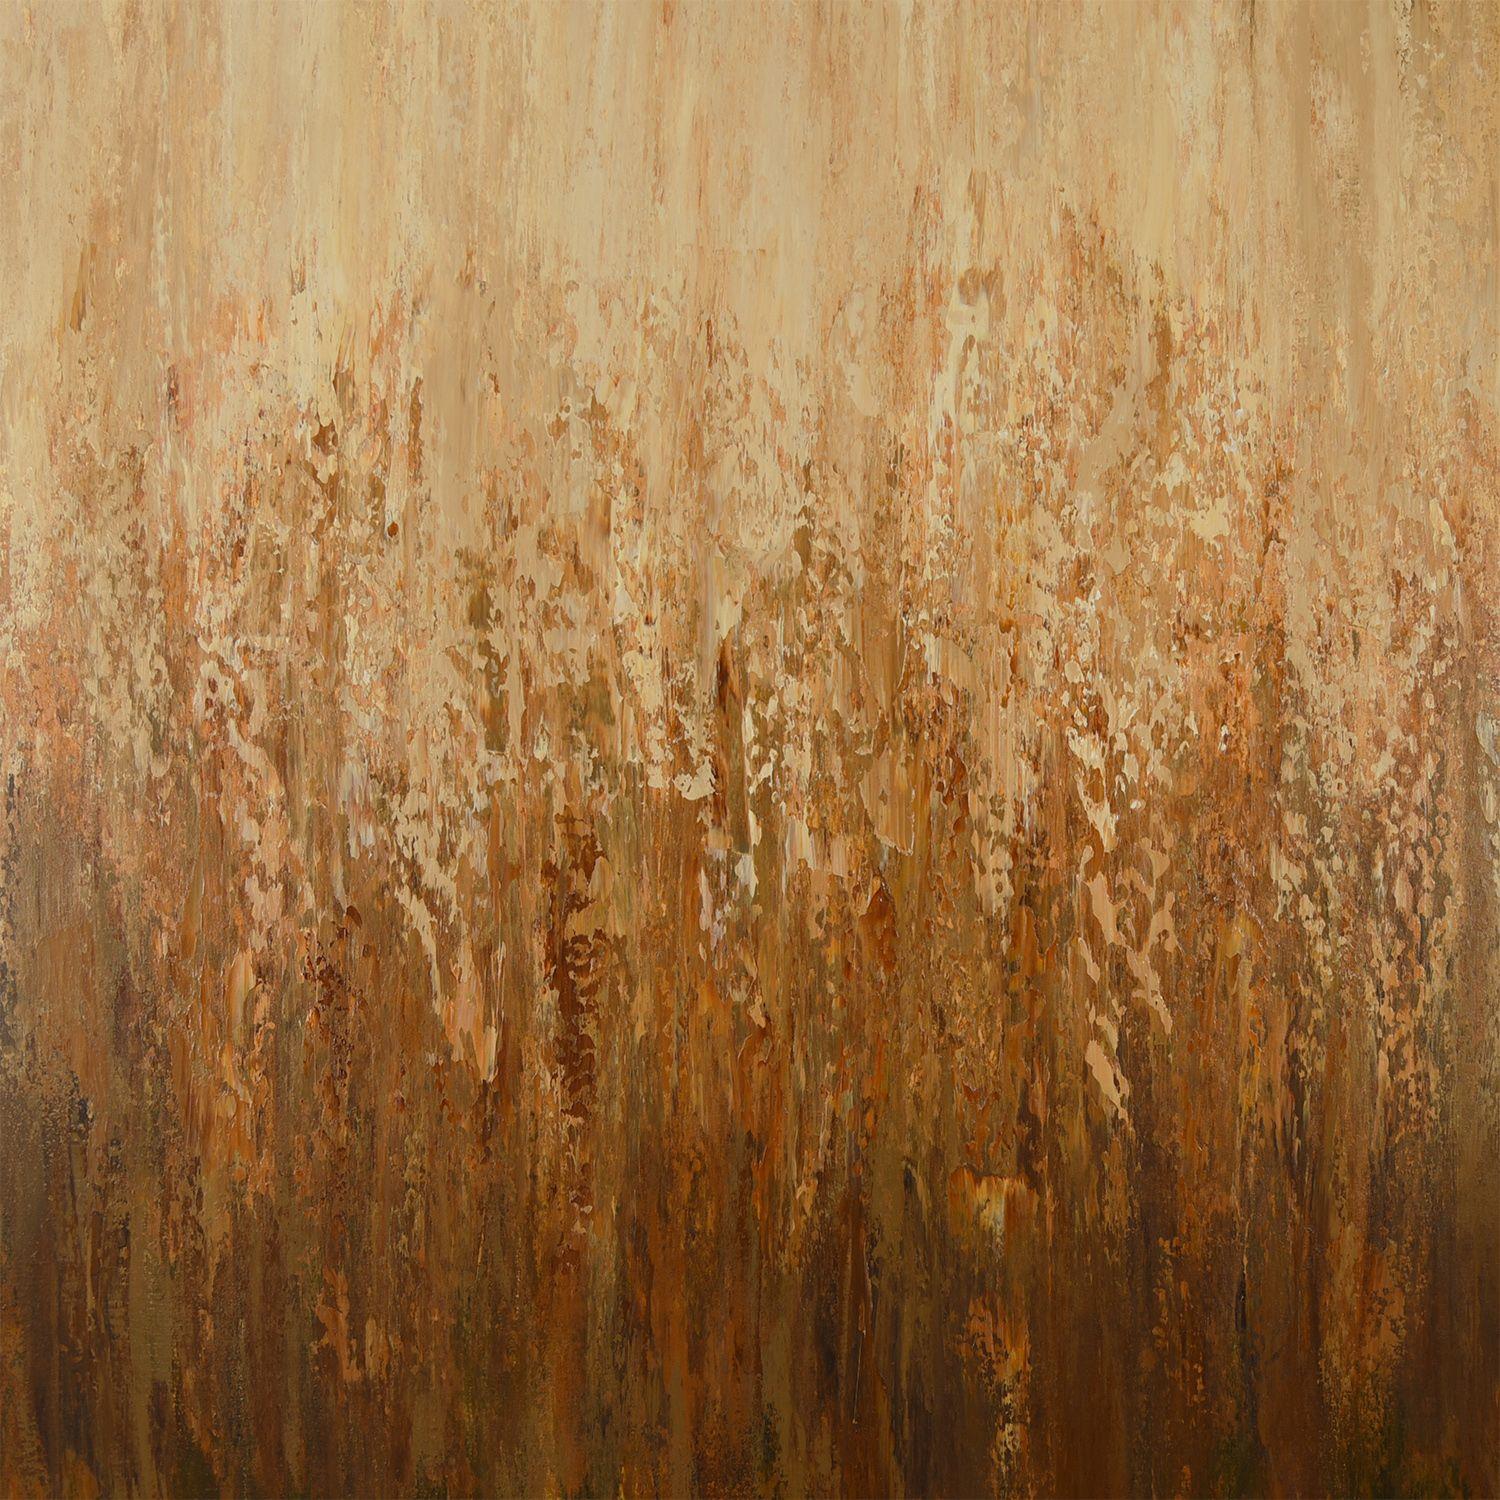 Suzanne Vaughan Abstract Painting - Golden Field - Textured Nature Abstract, Painting, Acrylic on Canvas